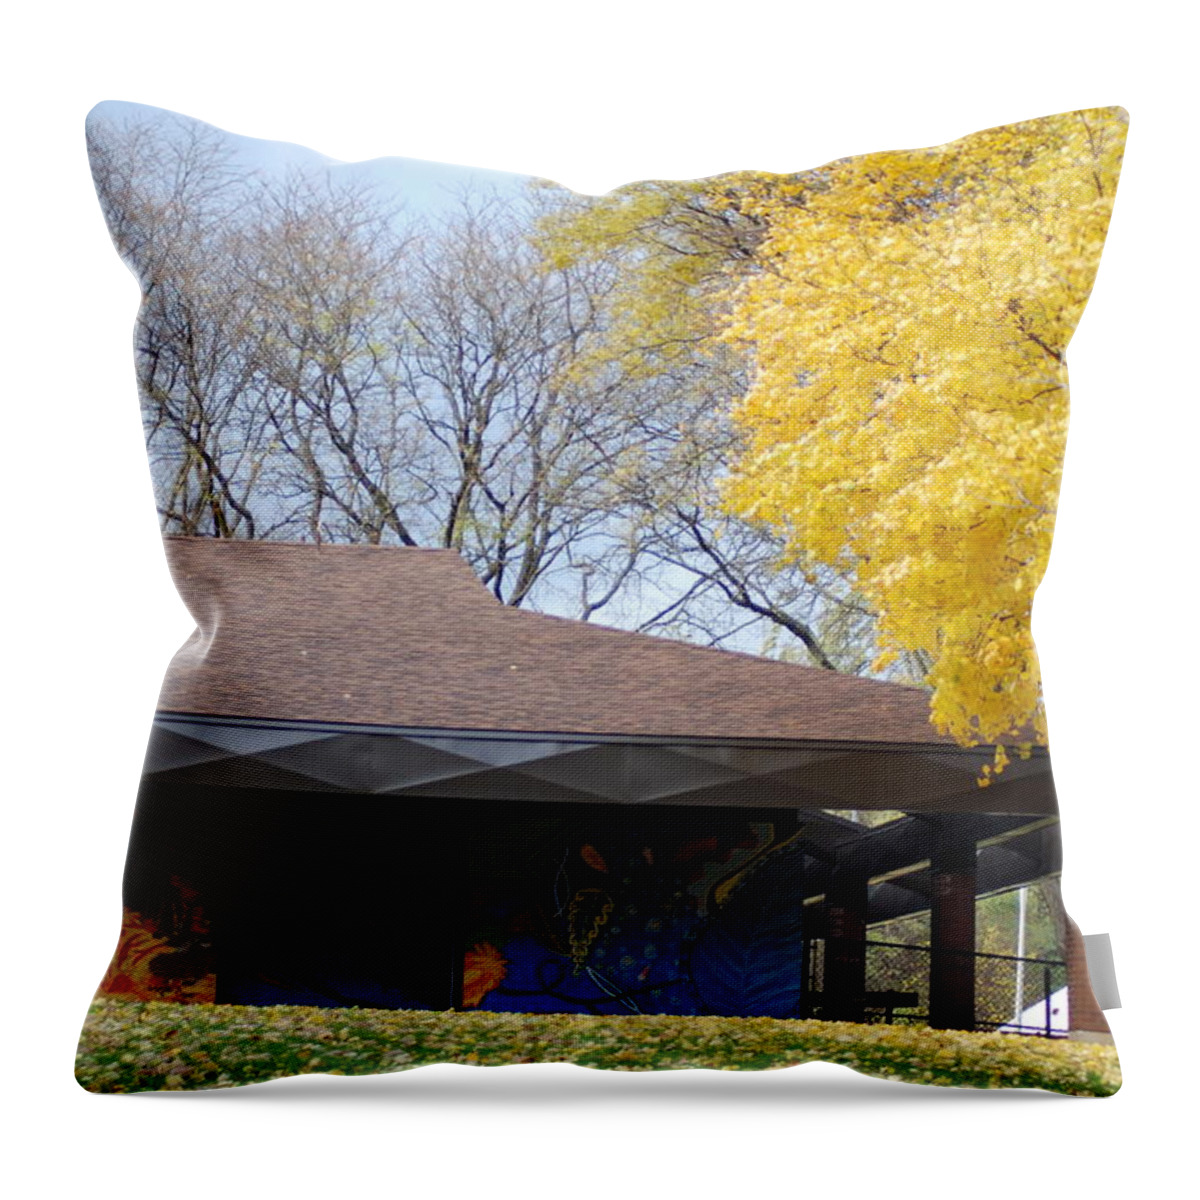  Throw Pillow featuring the photograph Autumn Transition 152 by Ee Photography